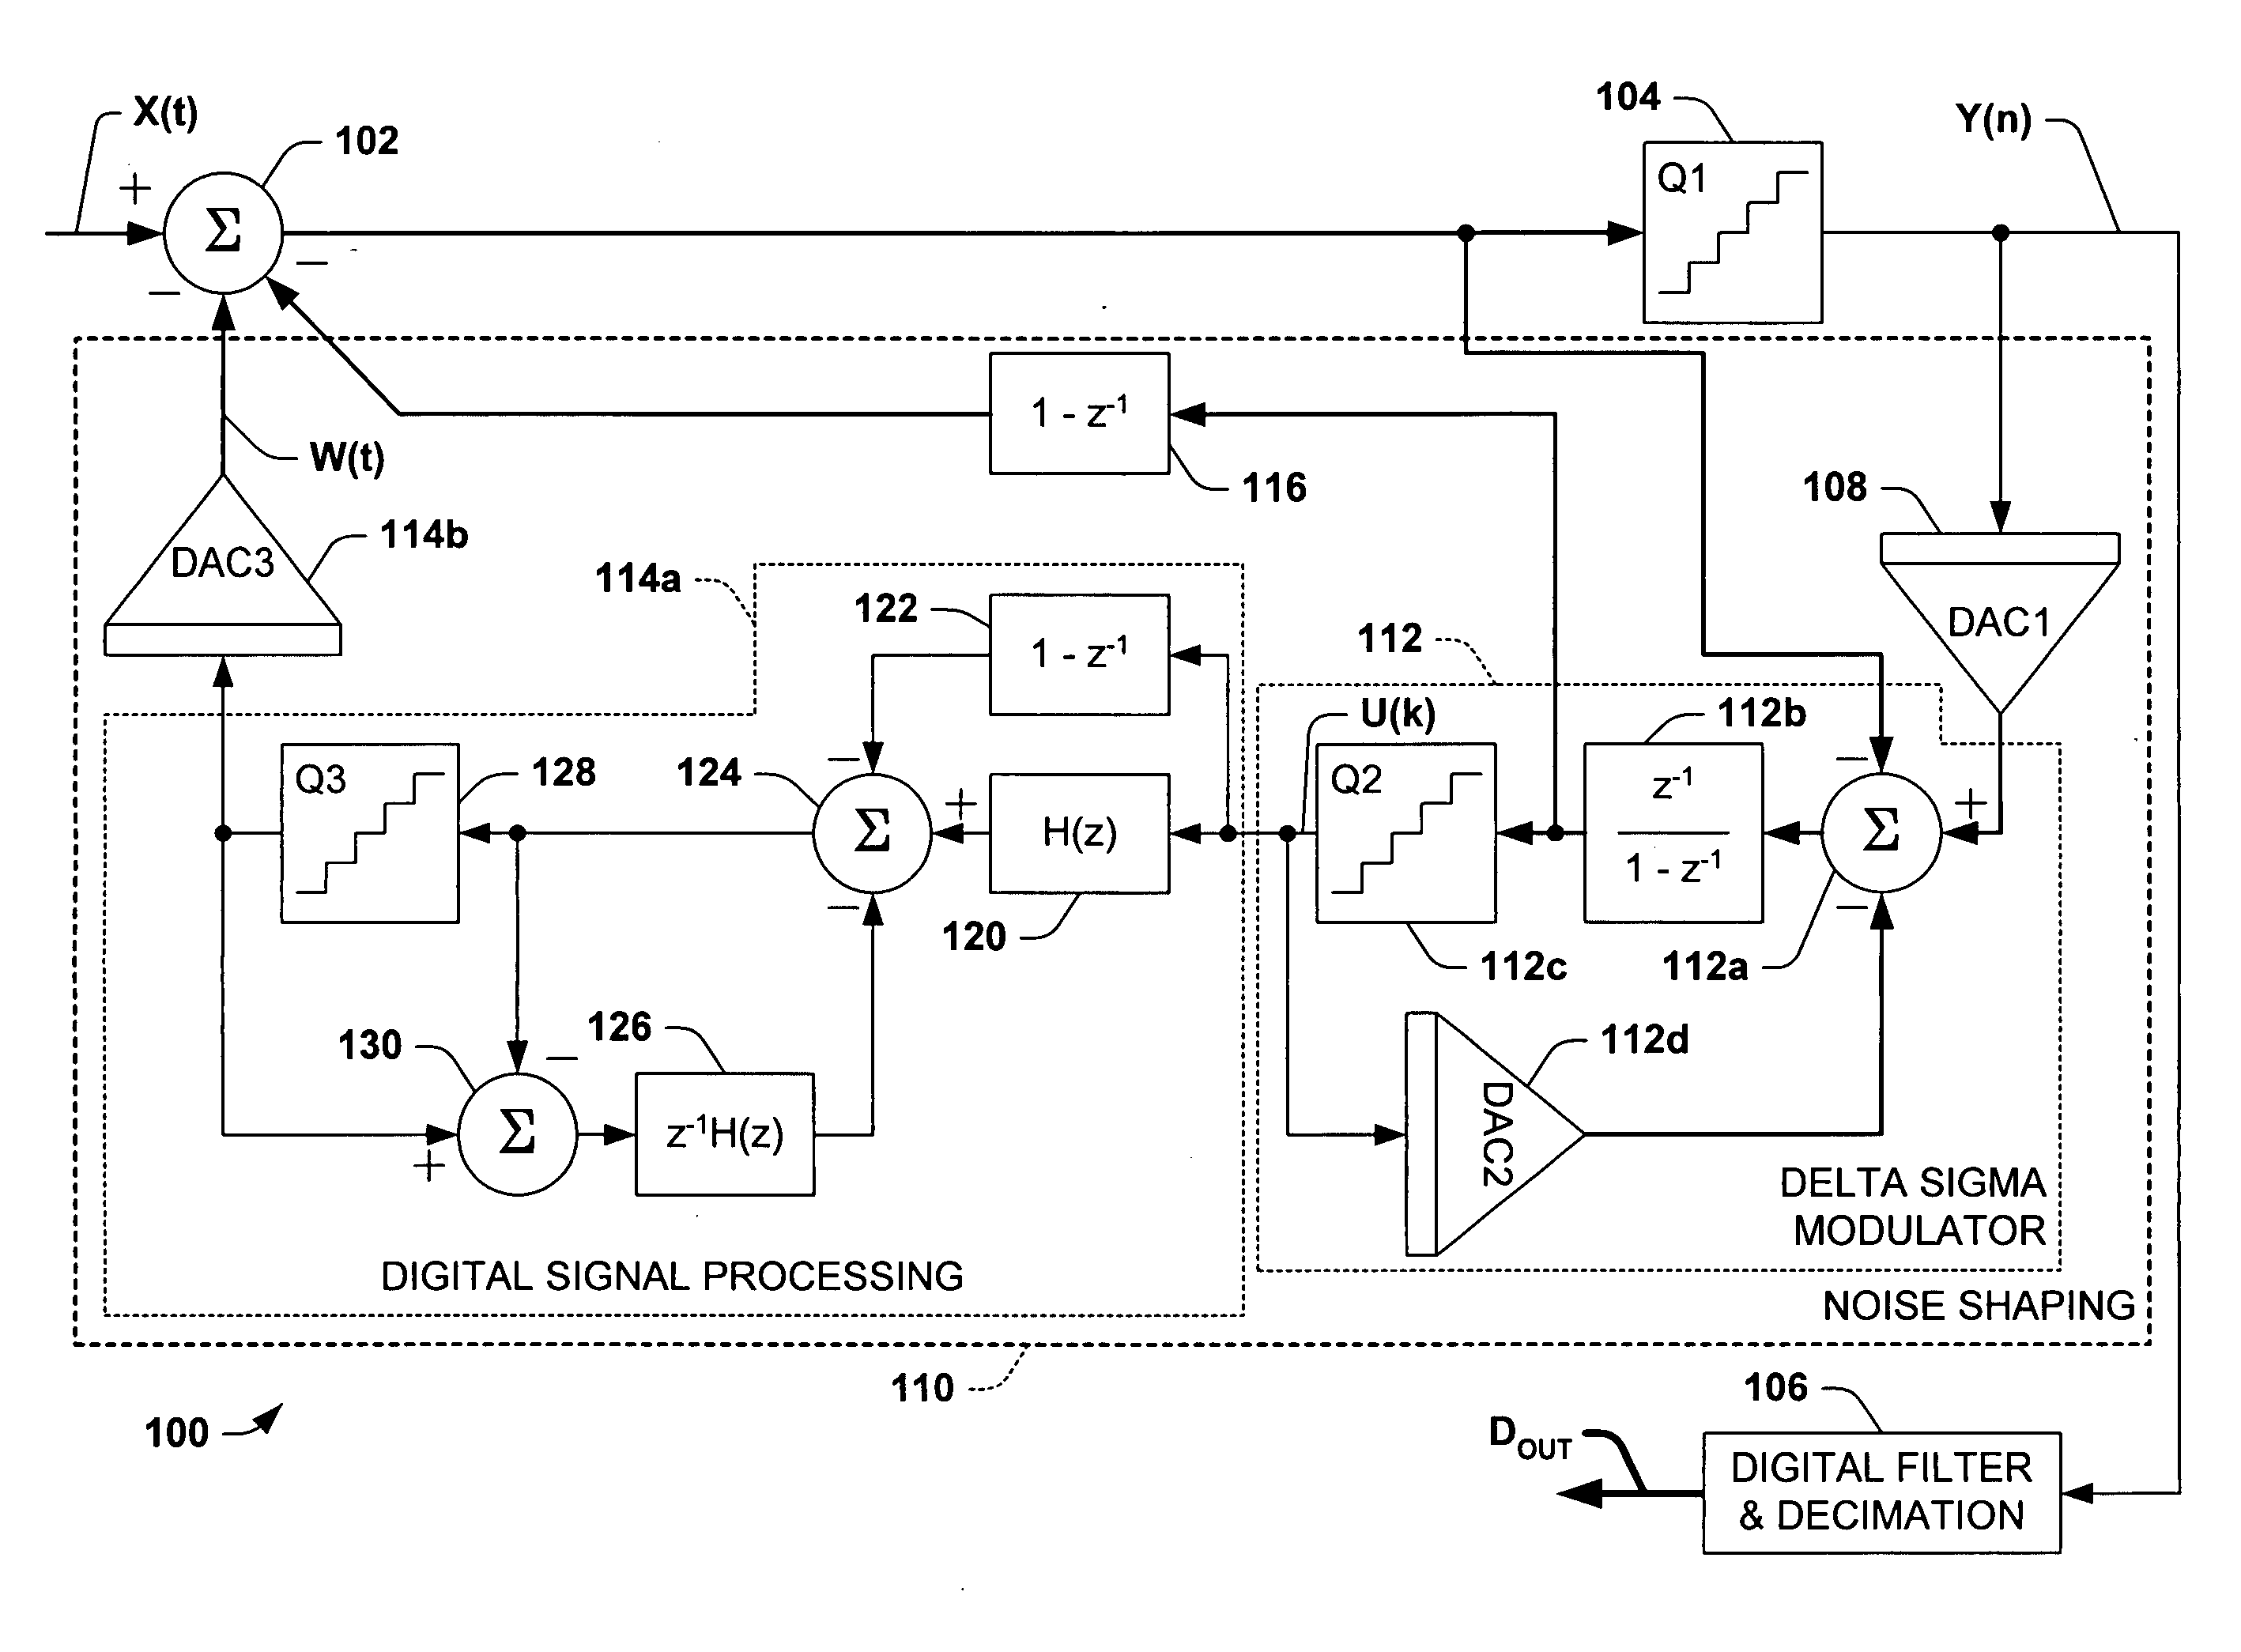 Analog-to-digital conversion system with second order noise shaping and a single amplifier